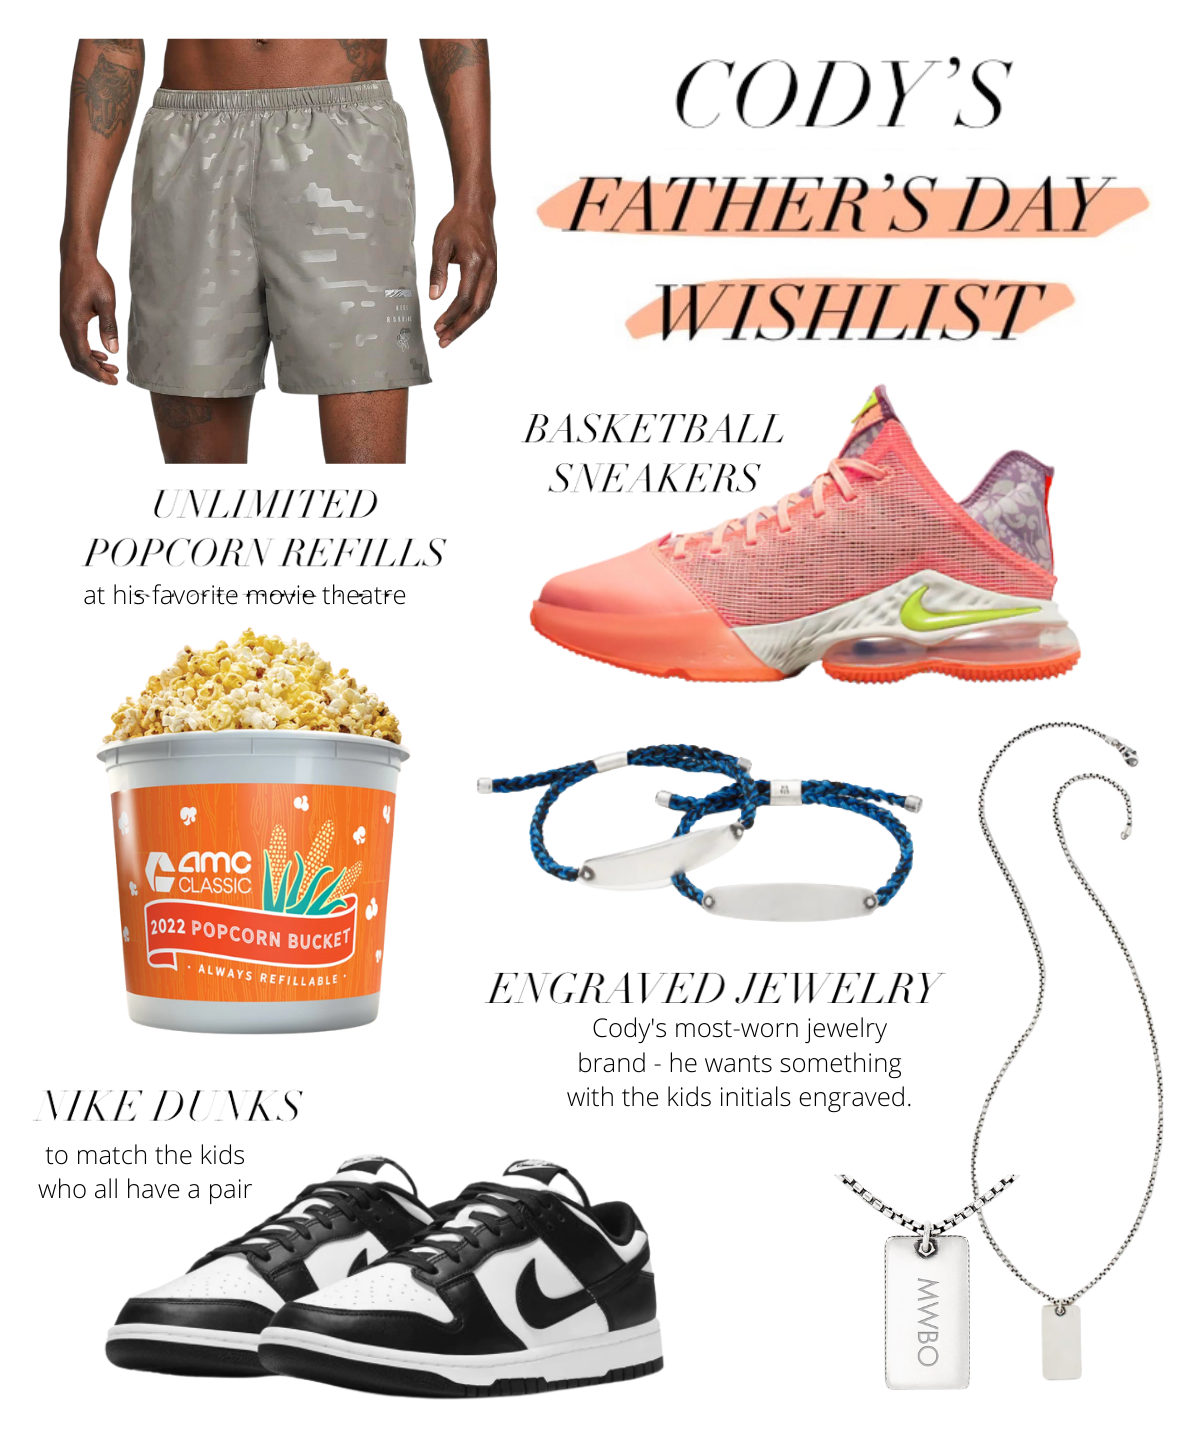 Cody's wishlist, Father's Day wish list, souvenir ideas, fathers day souvenir guide, nike shorts, basketball sneakers, Nike Dunks, engraved jewlelry, Kendra Scott 